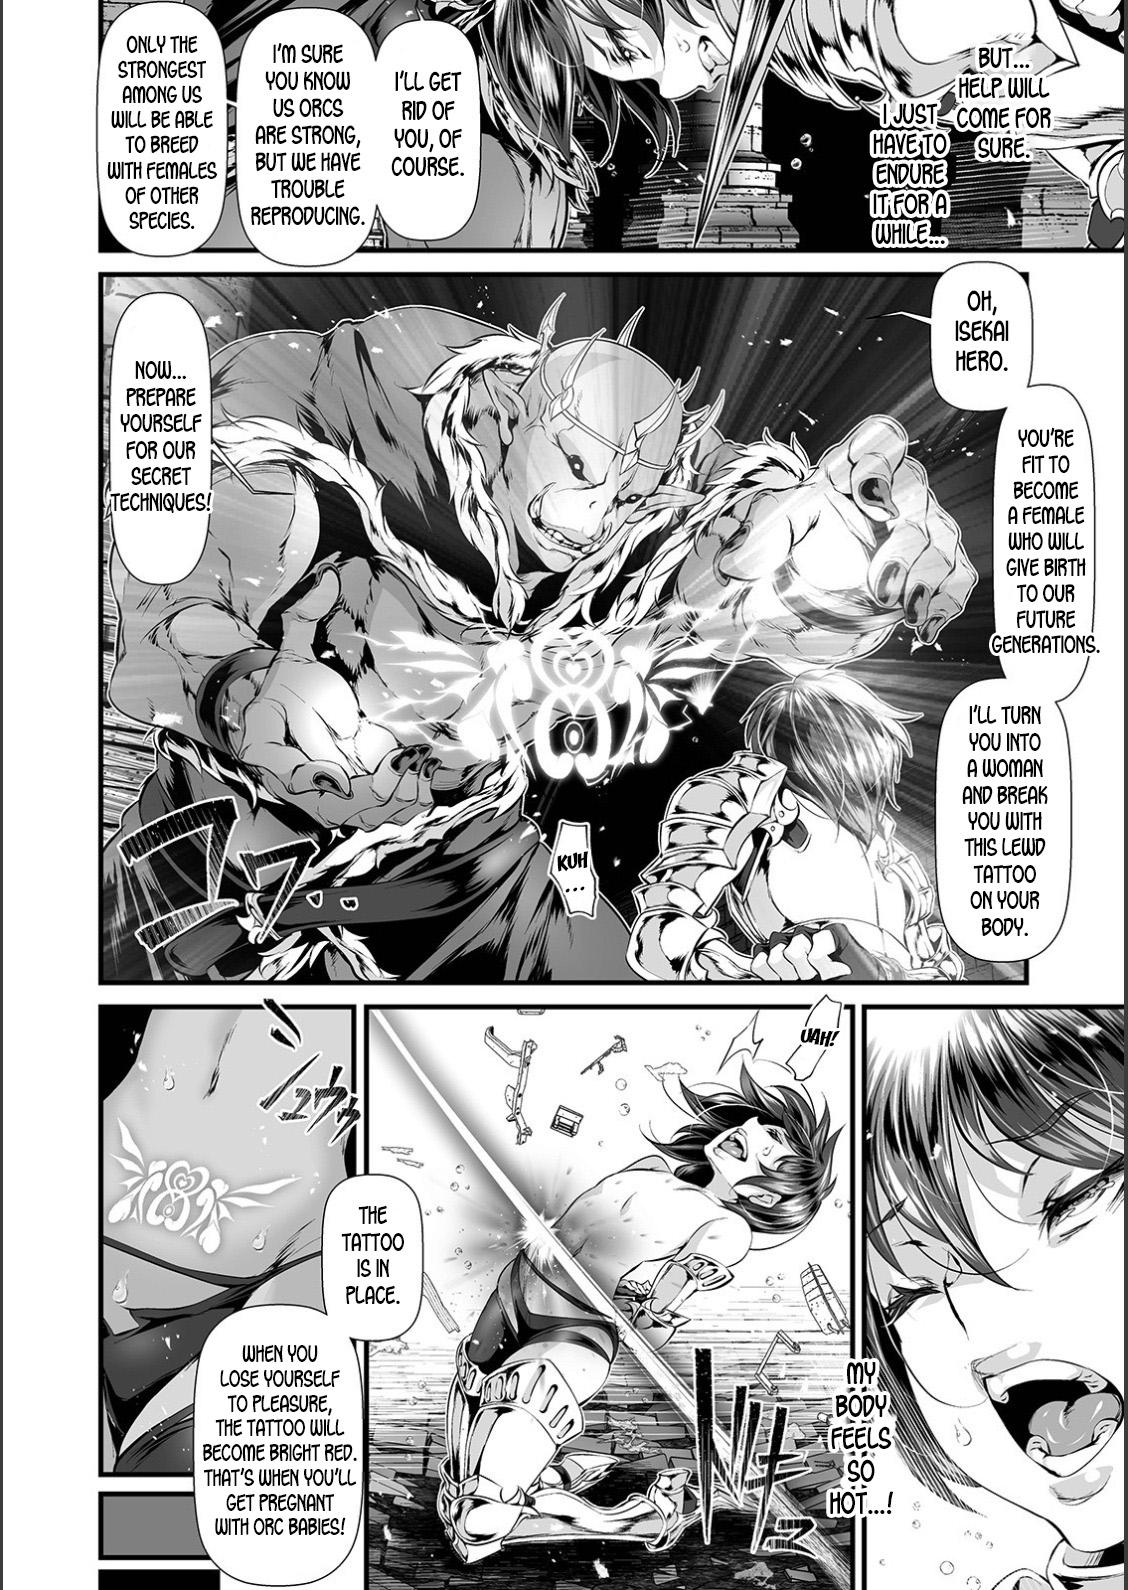 Bisex Nyotaika Eiyuu Orc Chinpo Haiboku Kitan | The Mysterious Story of a Genderbent Hero being Defeated by Orc Cocks Big Tits - Page 8